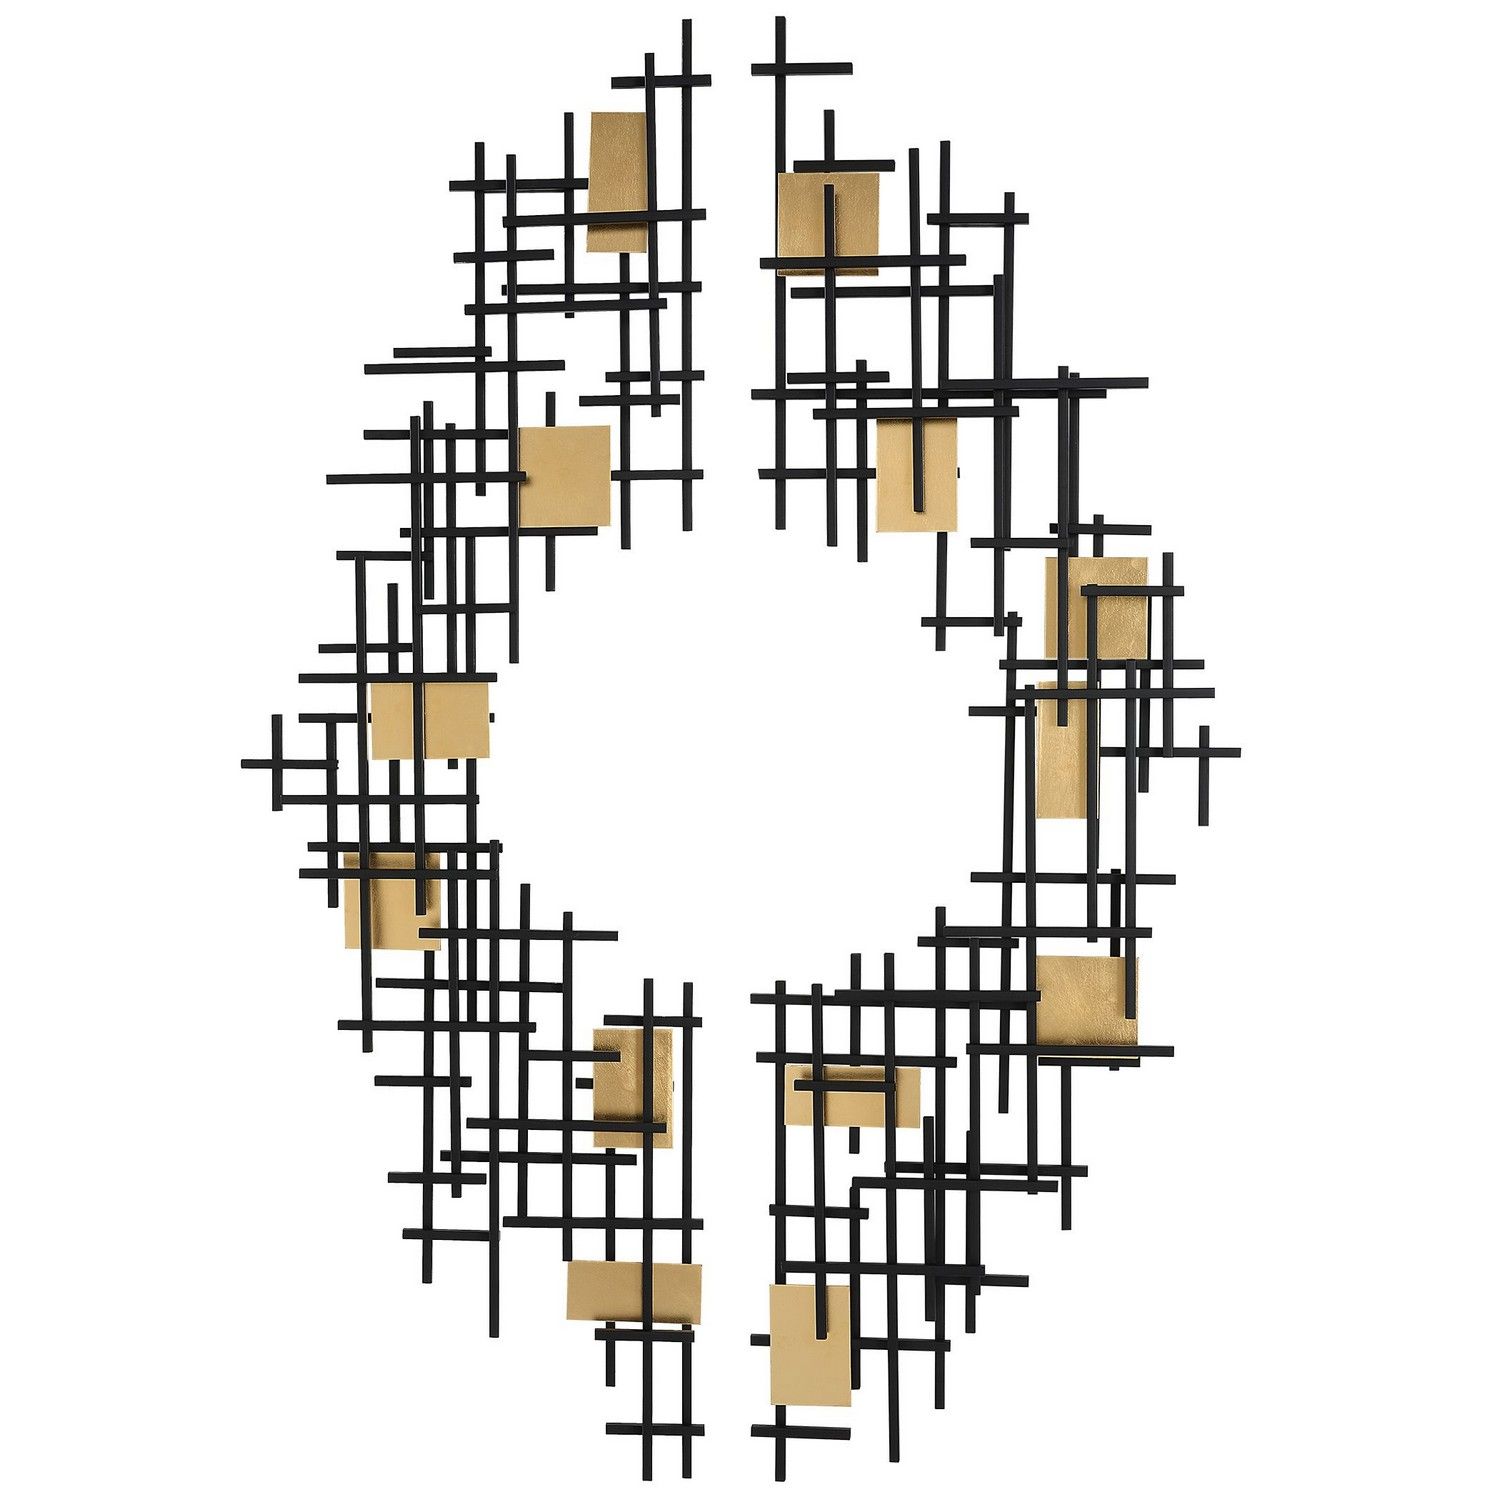 Uttermost Reflection Metal Grid Wall Decor - Set of 2